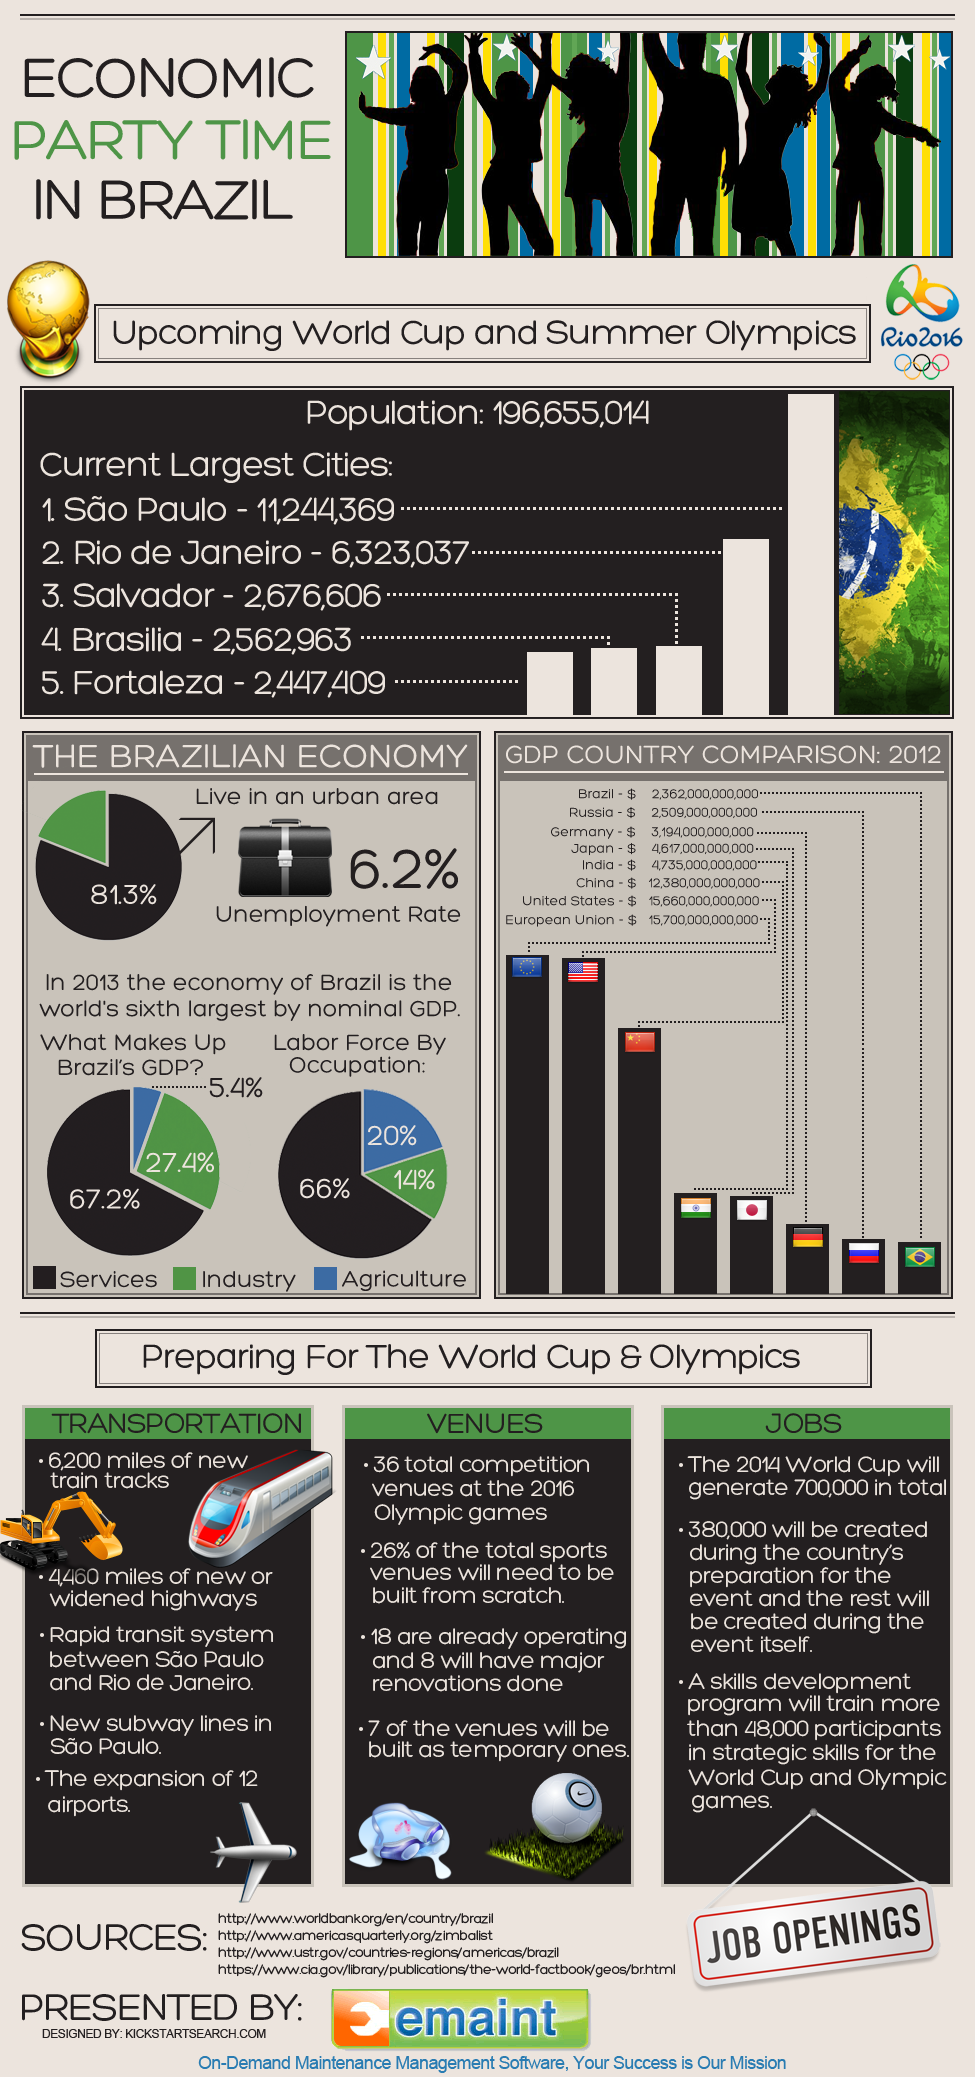 Economic party time in brazil infographic